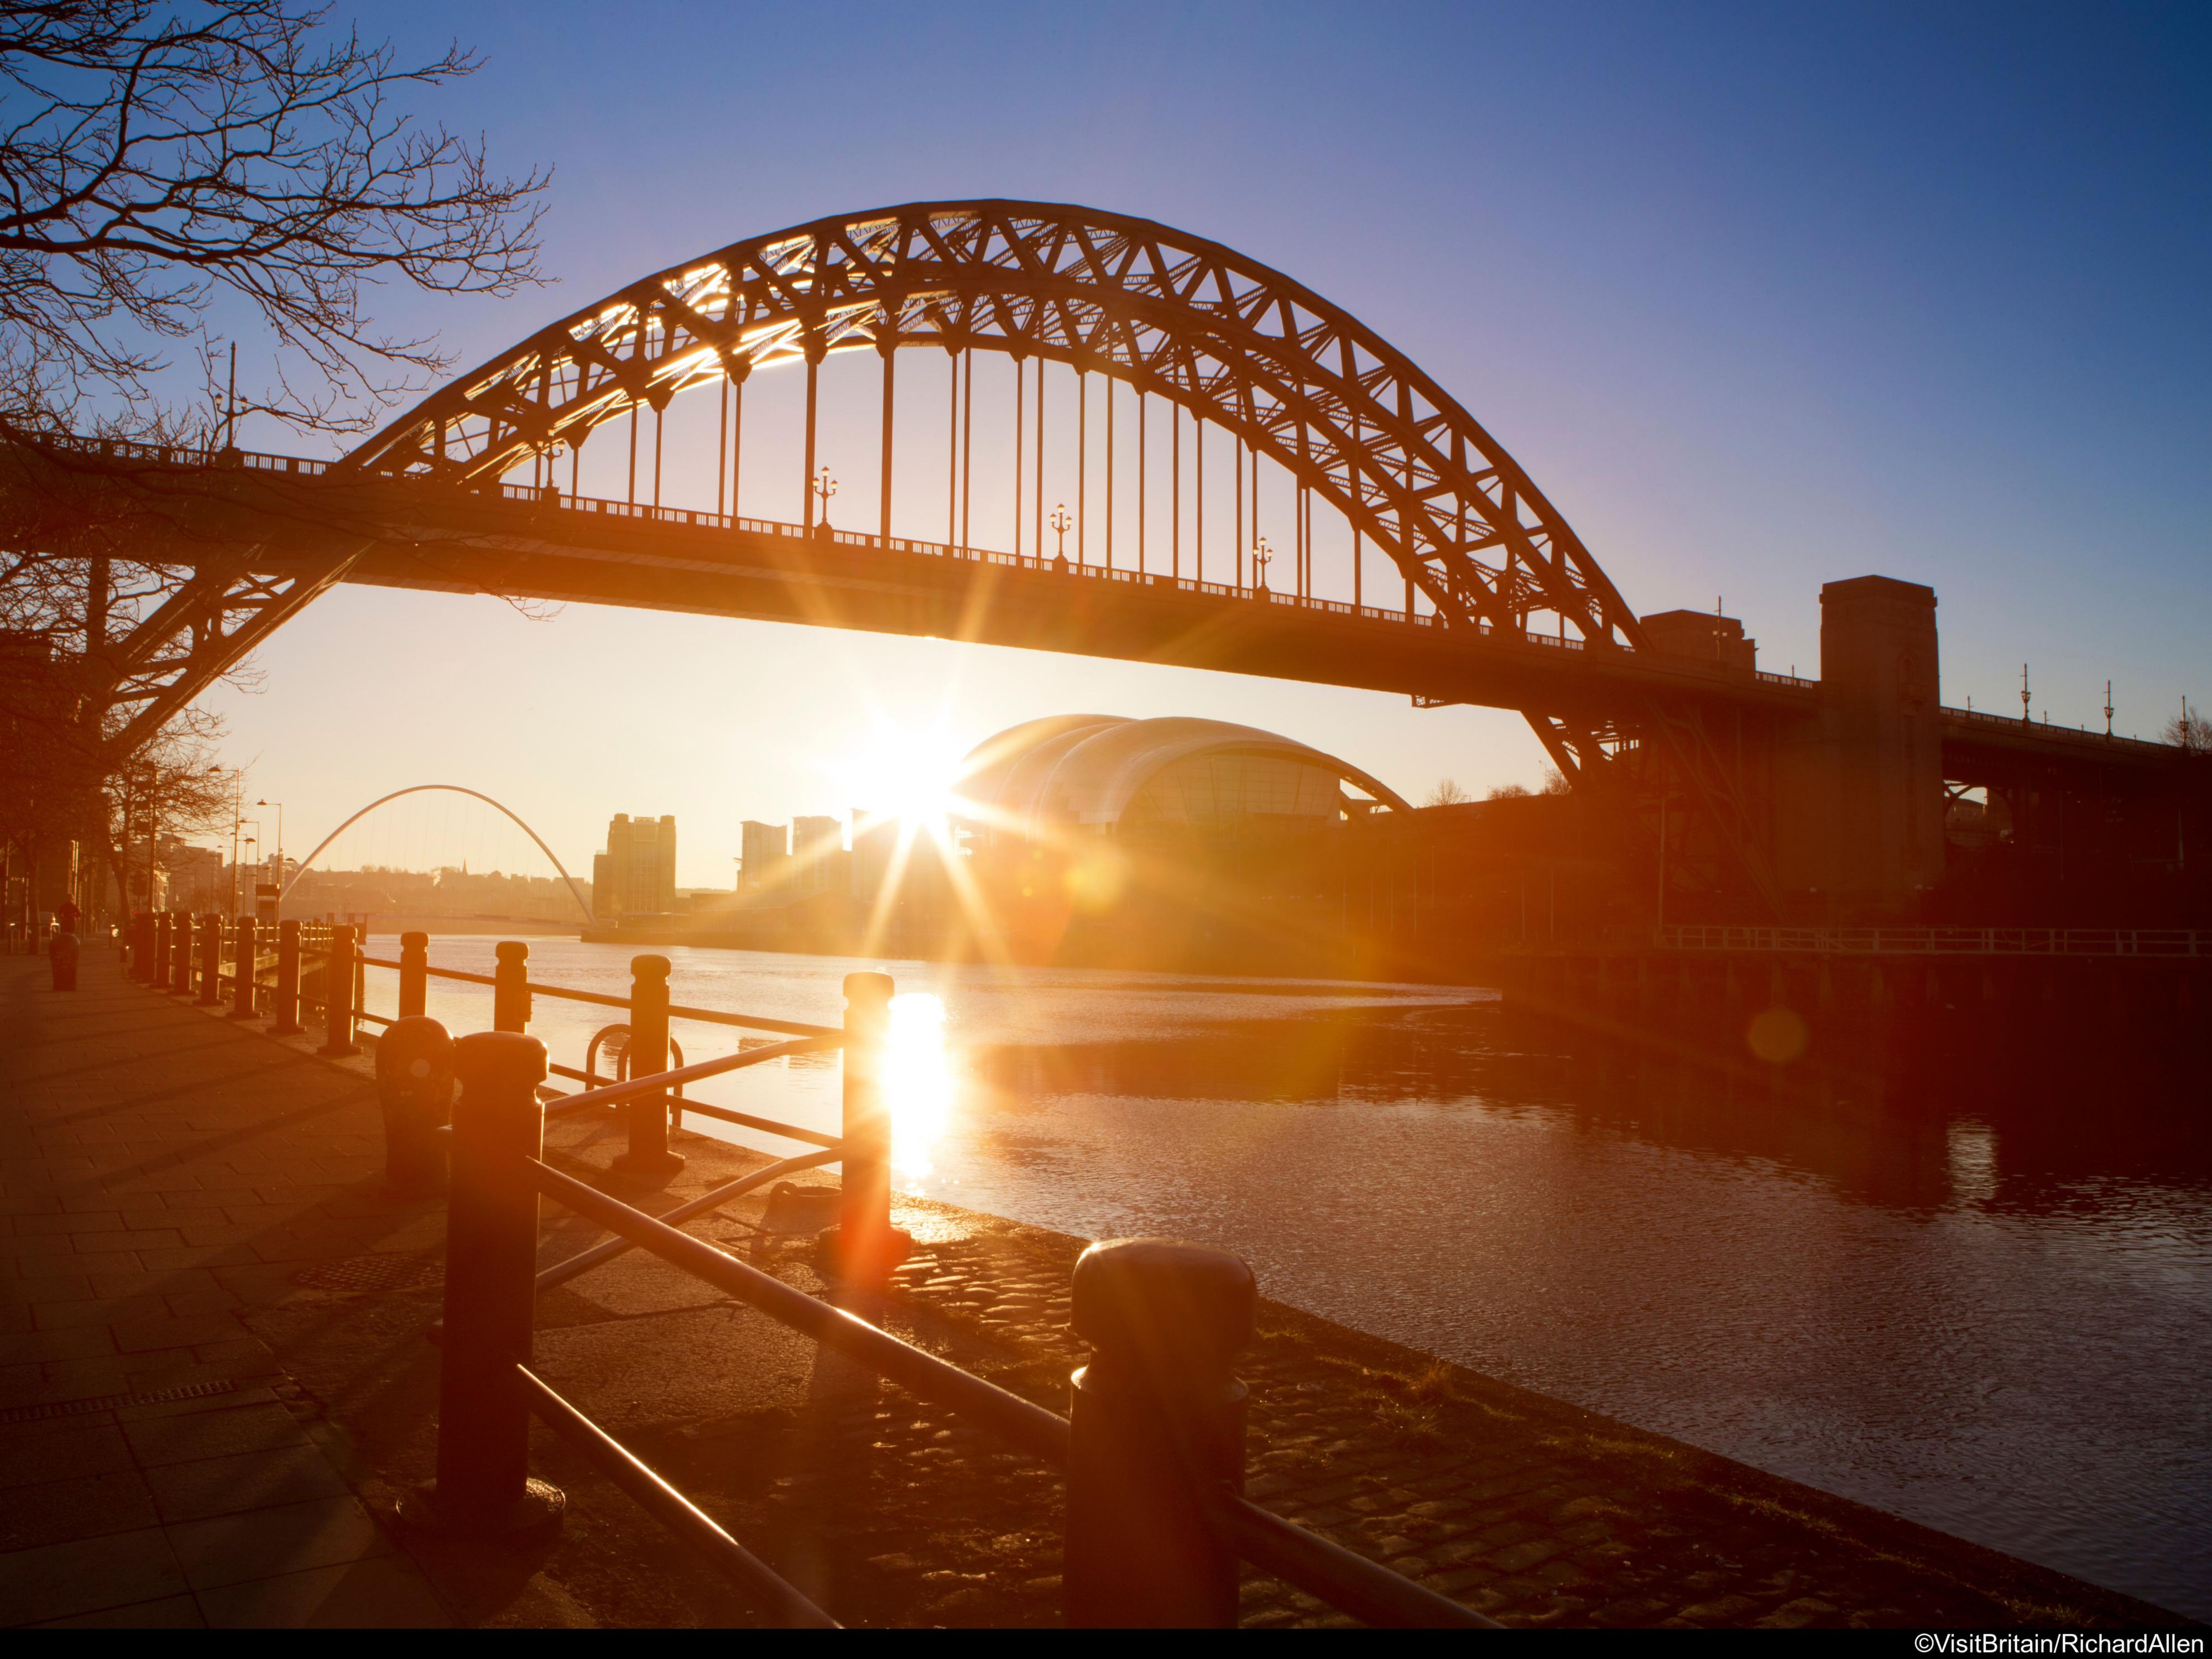 Our Newcastle hotel is just a 10-minute drive from Tyne Bridge